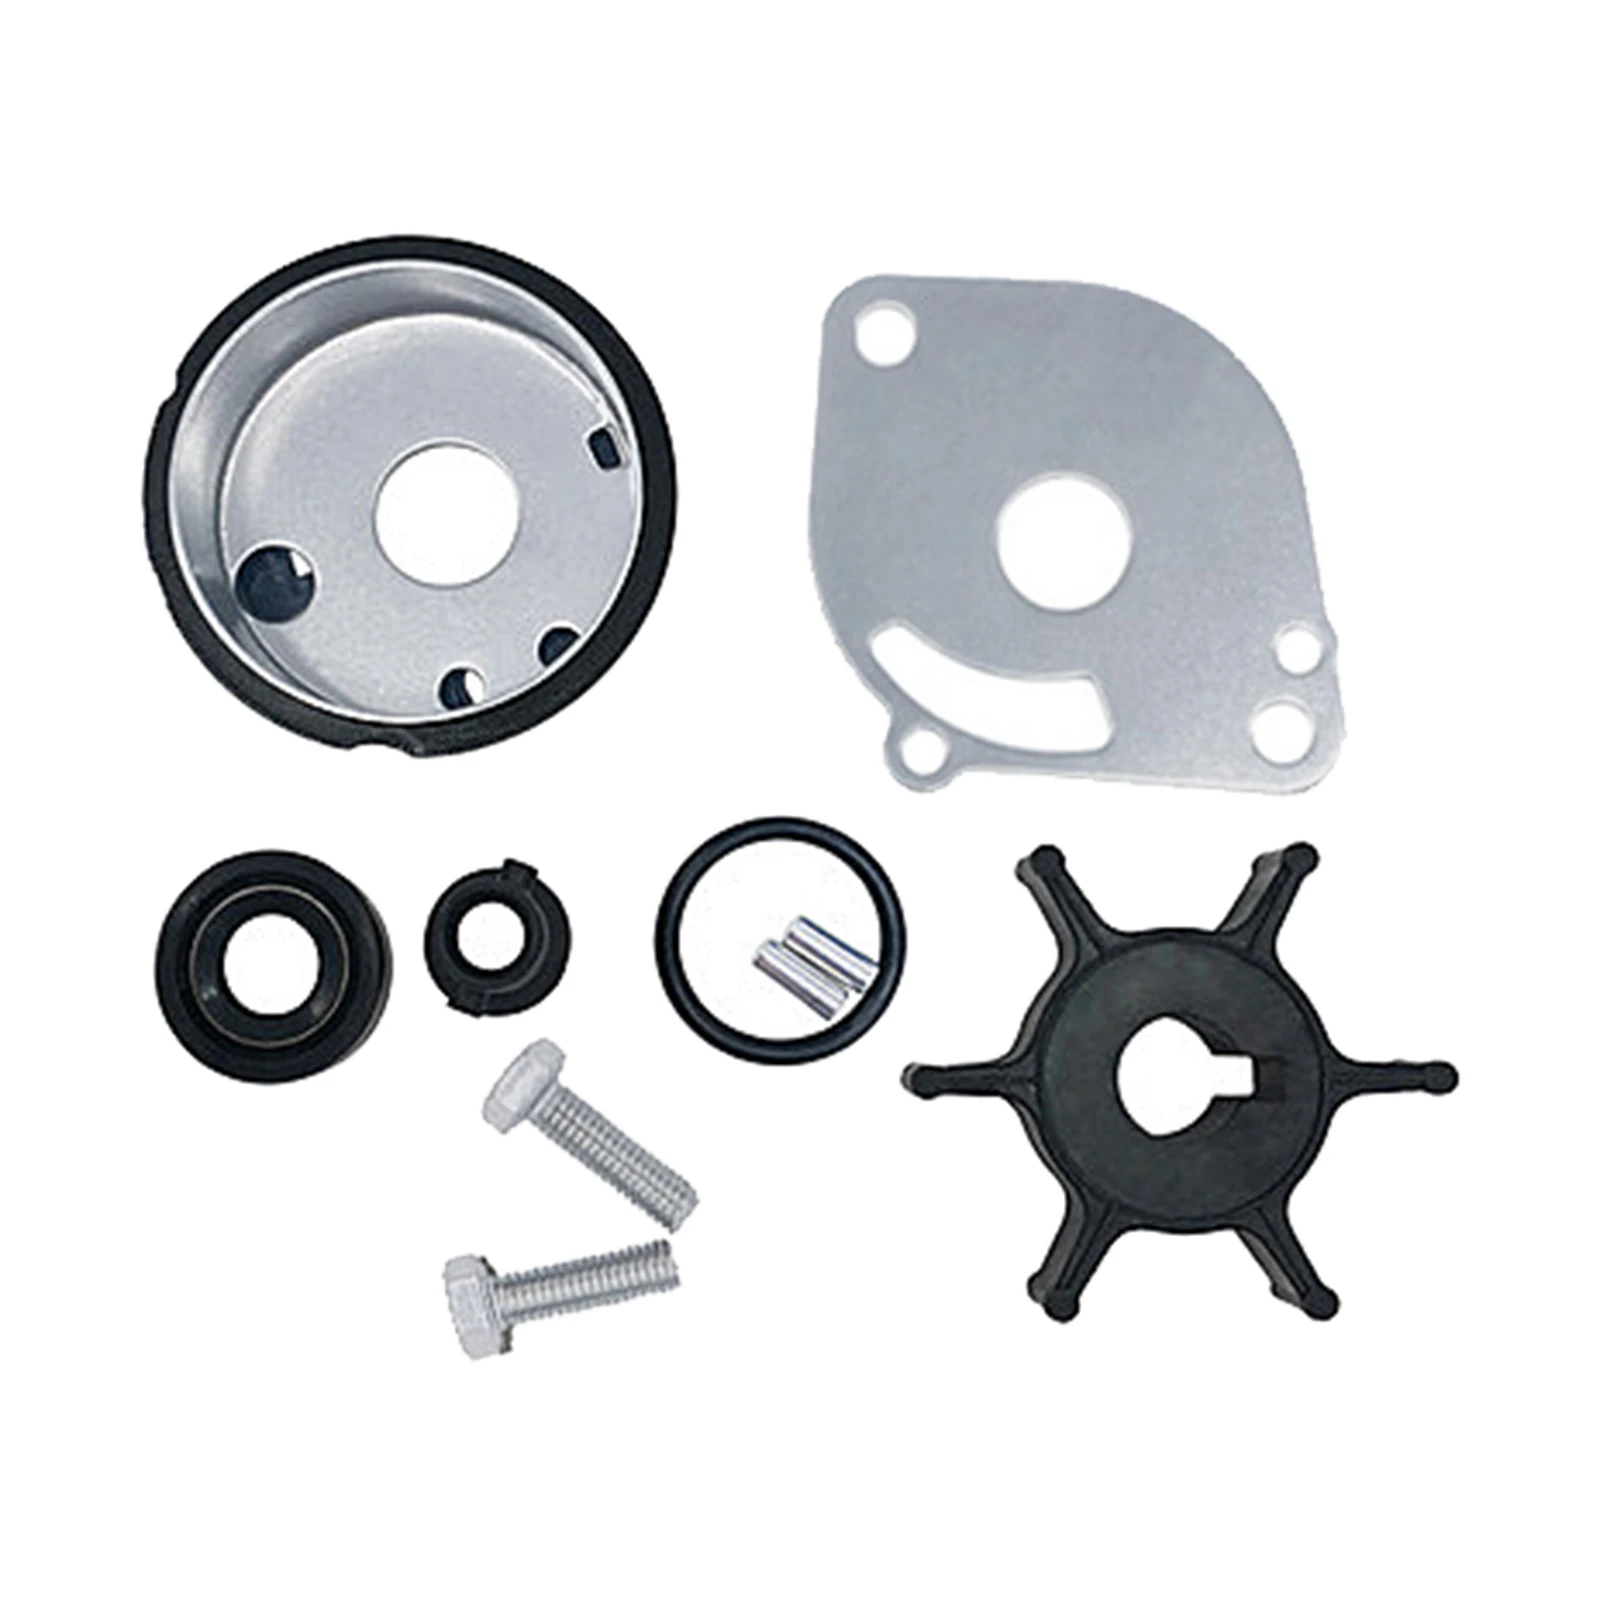 

Water Pump Impeller Kit for YAMAHA 2HP 2 STROKE1988-2009 6A1-W0078-02 6A1-W0078-02-00 18-3462 Replace New